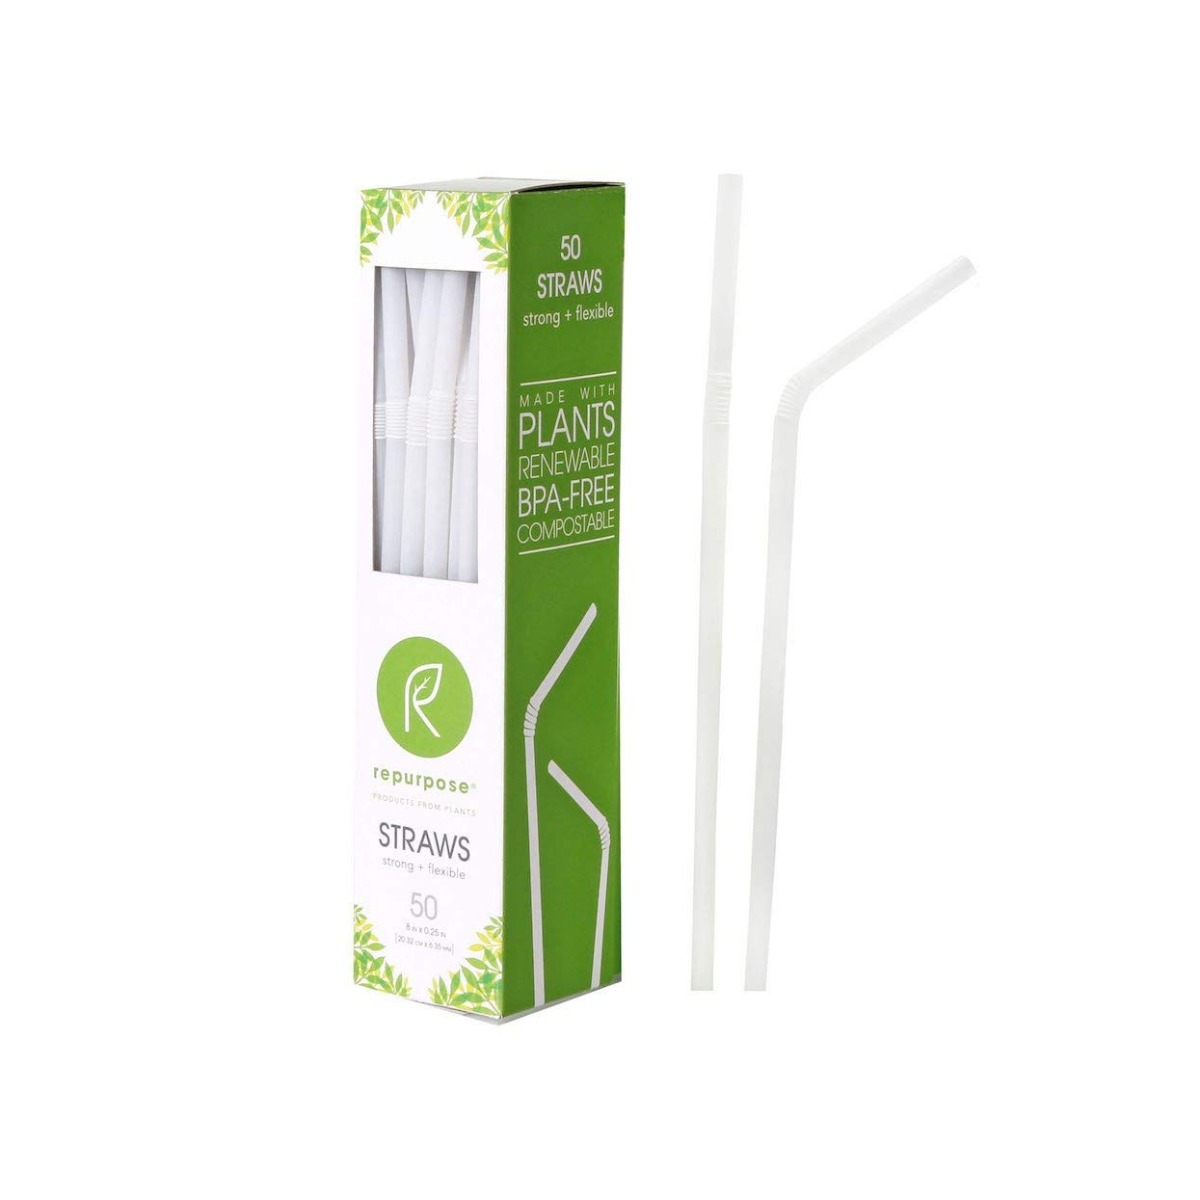 Picture of Repurpose KHFM00317858 100 Percent Compostable Plant-Based Straws, 2.4 oz - 50 Count